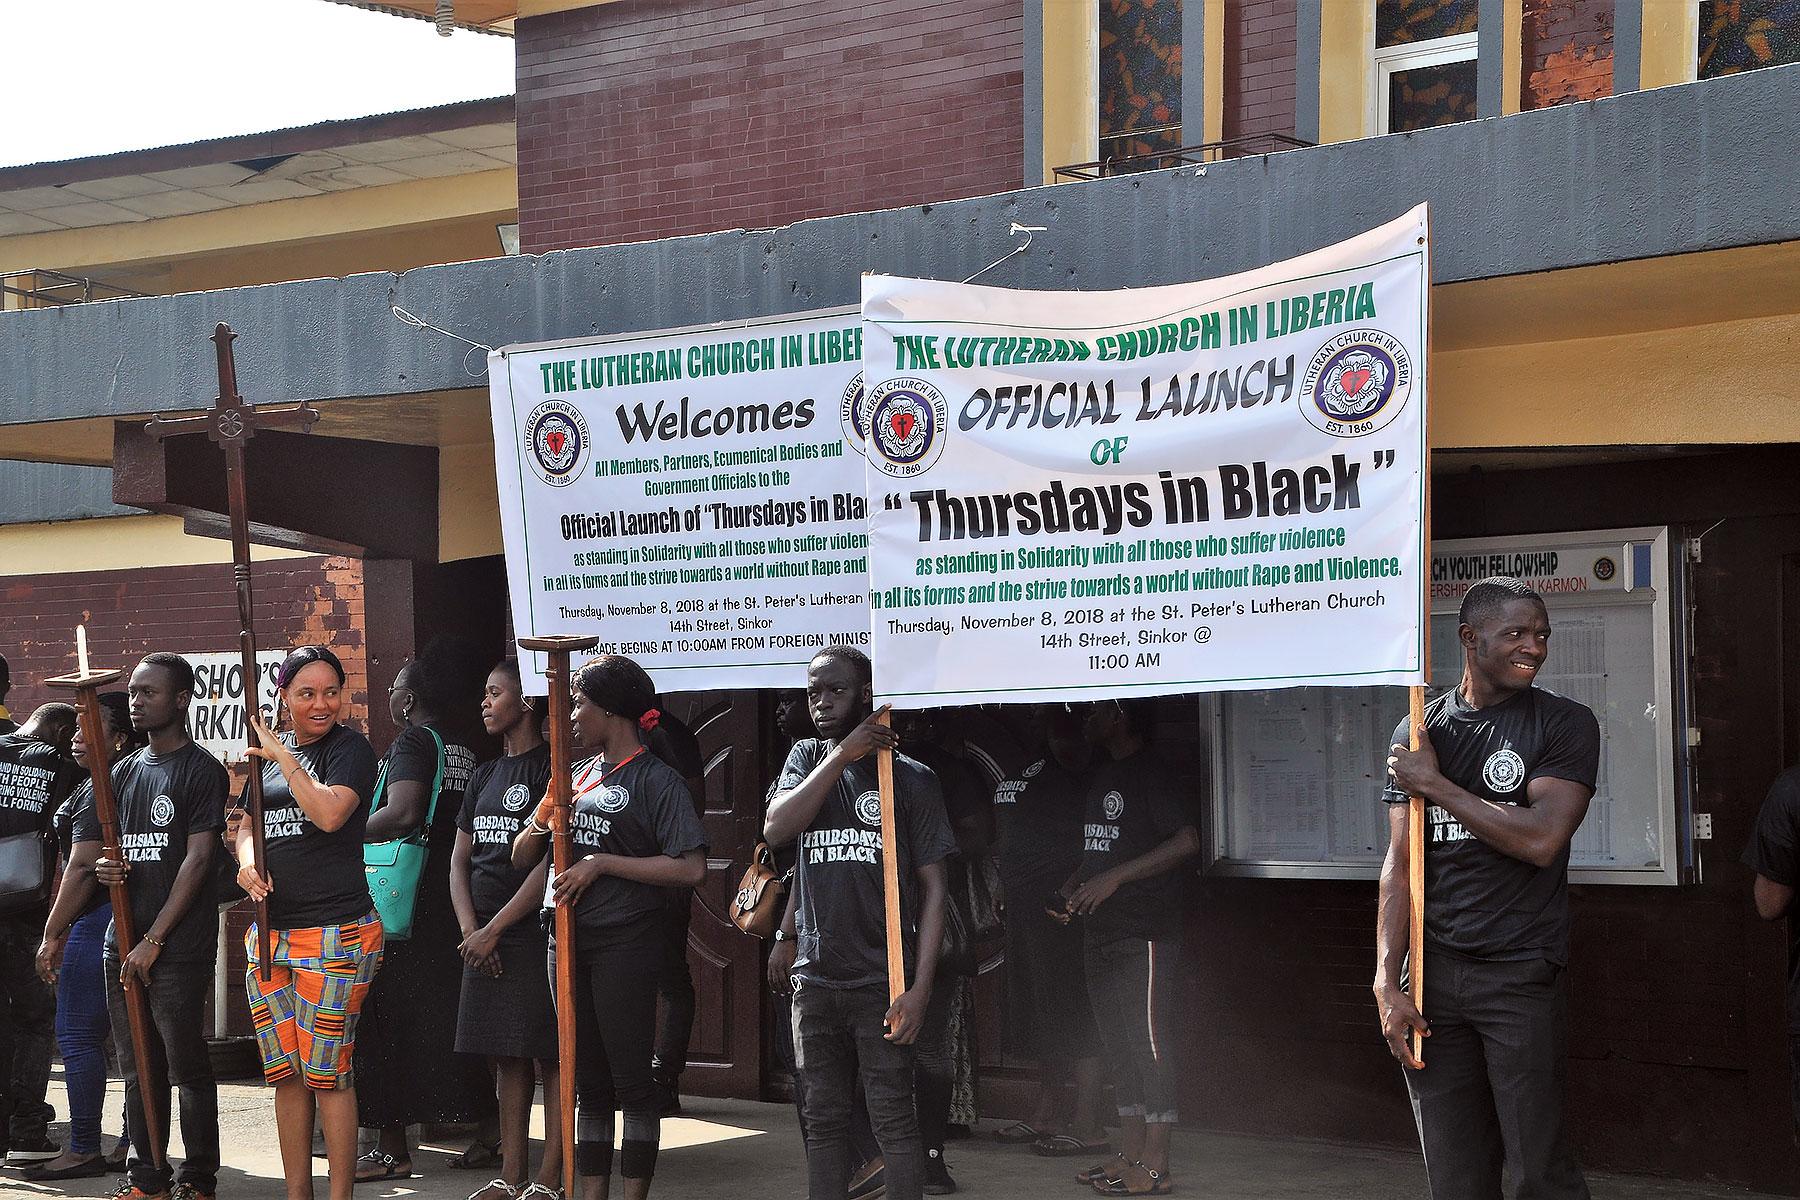 Acolytes of the Lutheran Church in Liberia prepare to lead the march protesting all forms of violence in the Thursdays in Black campaign. All photos: LCL/ Linda Johnson Seyenkulo